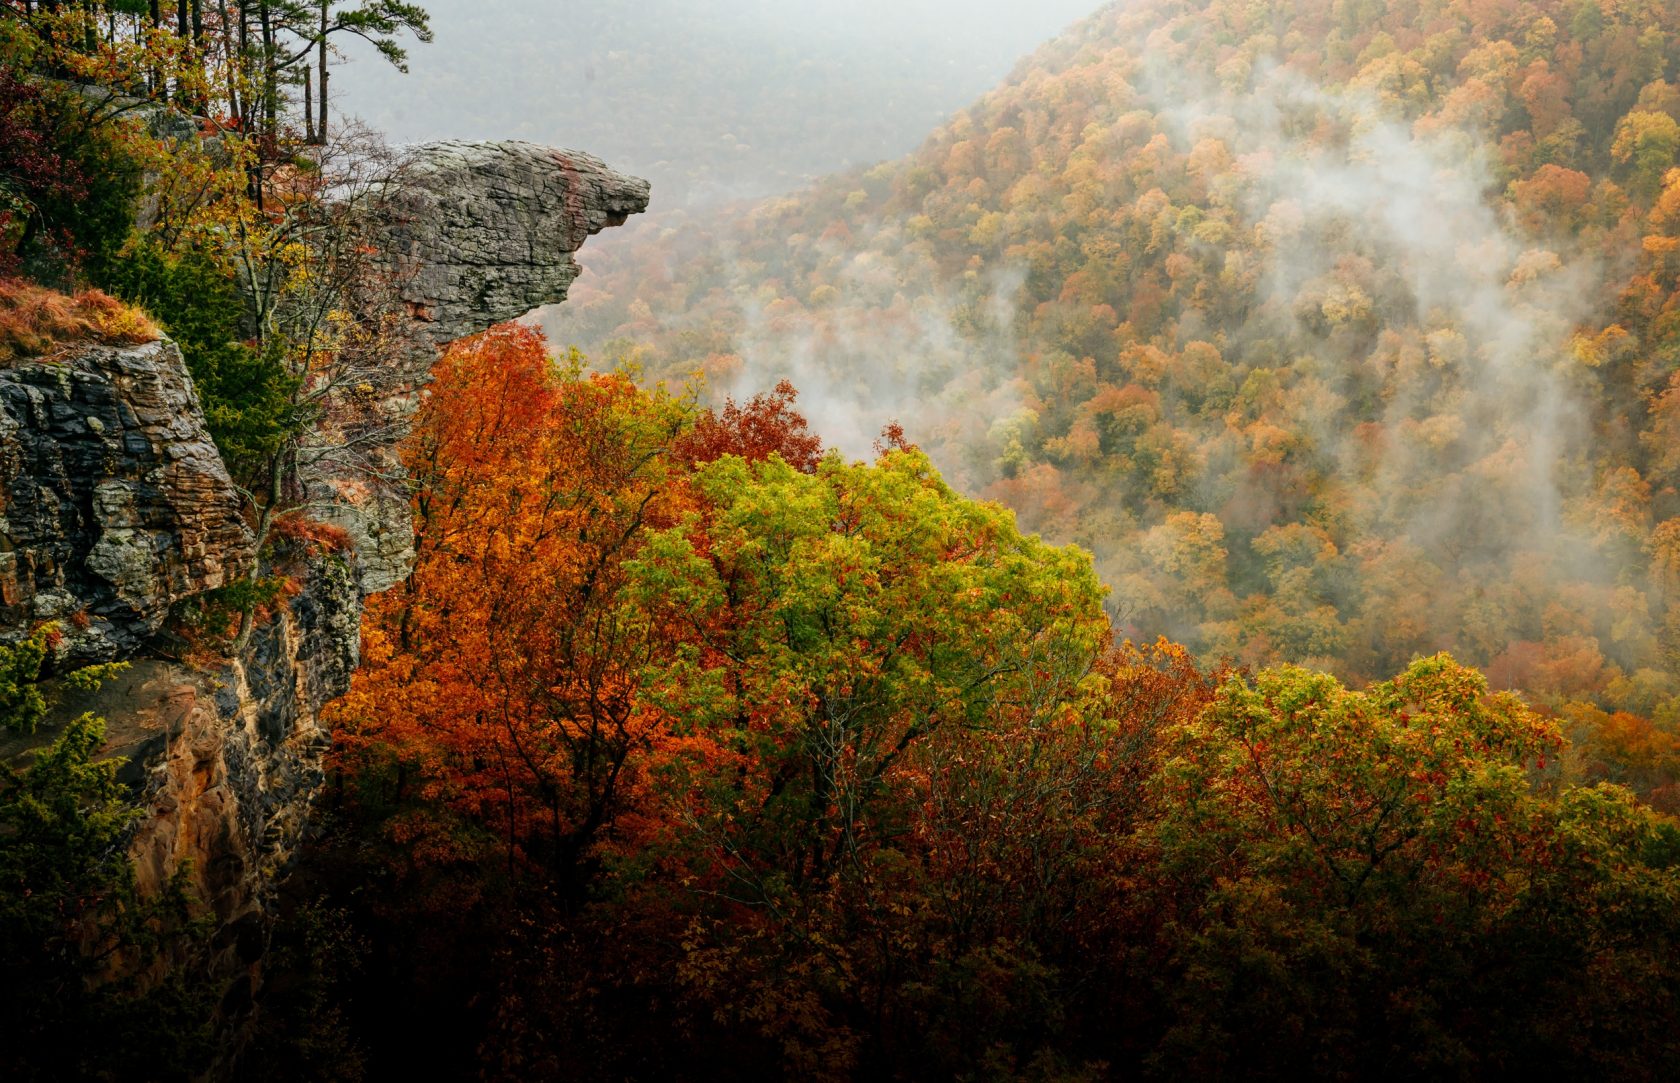 Fall Foliage at Whitaker Point / Hawksbill Crag